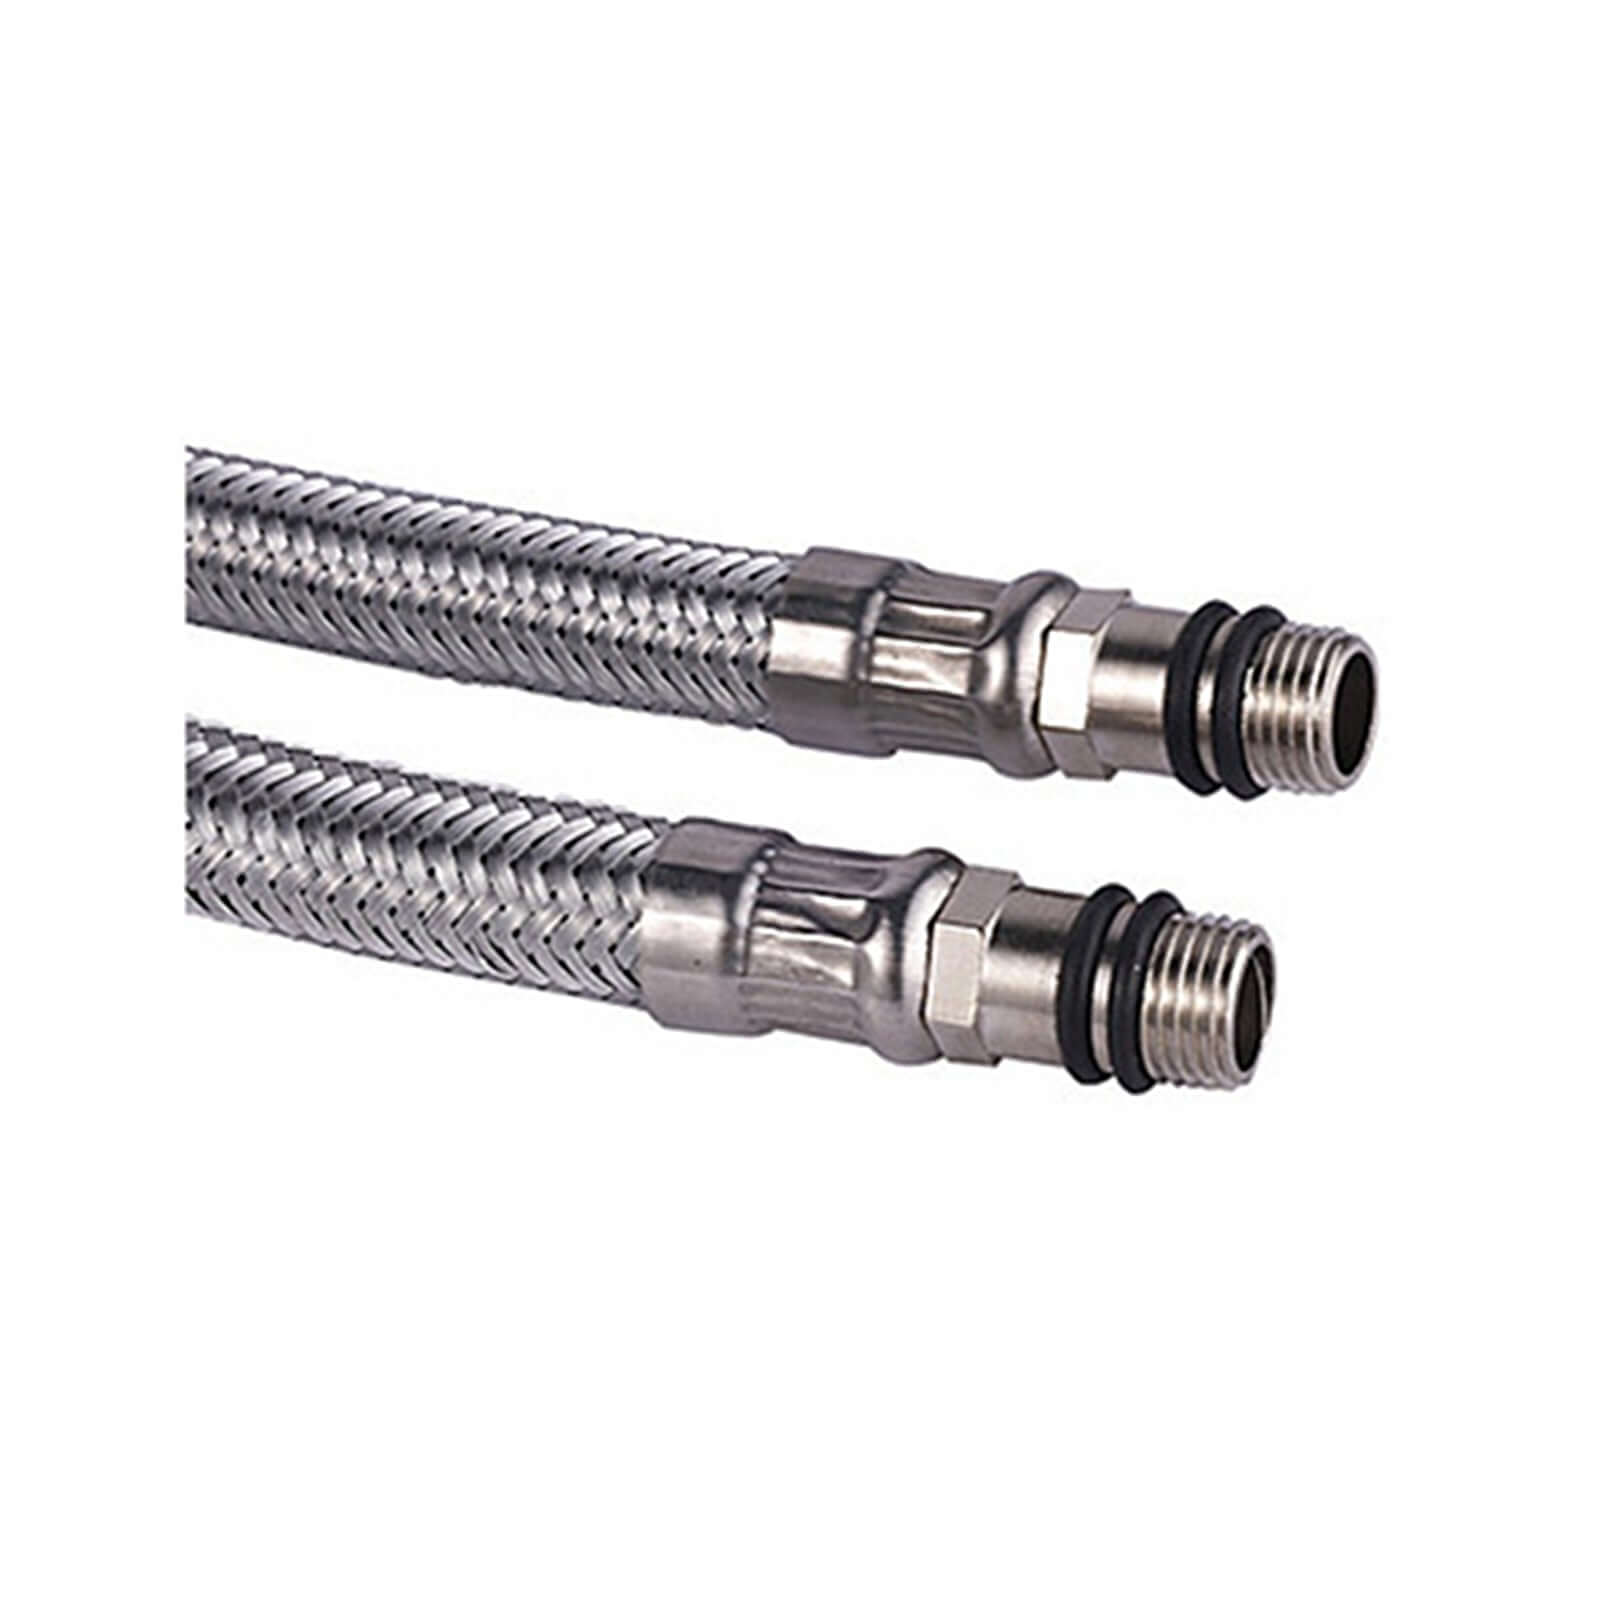 TA010-02-pair-of-flexible-braided-tap-connectors-for-kitchen-or-basin-taps-10mm-x-400mm-x-1-2